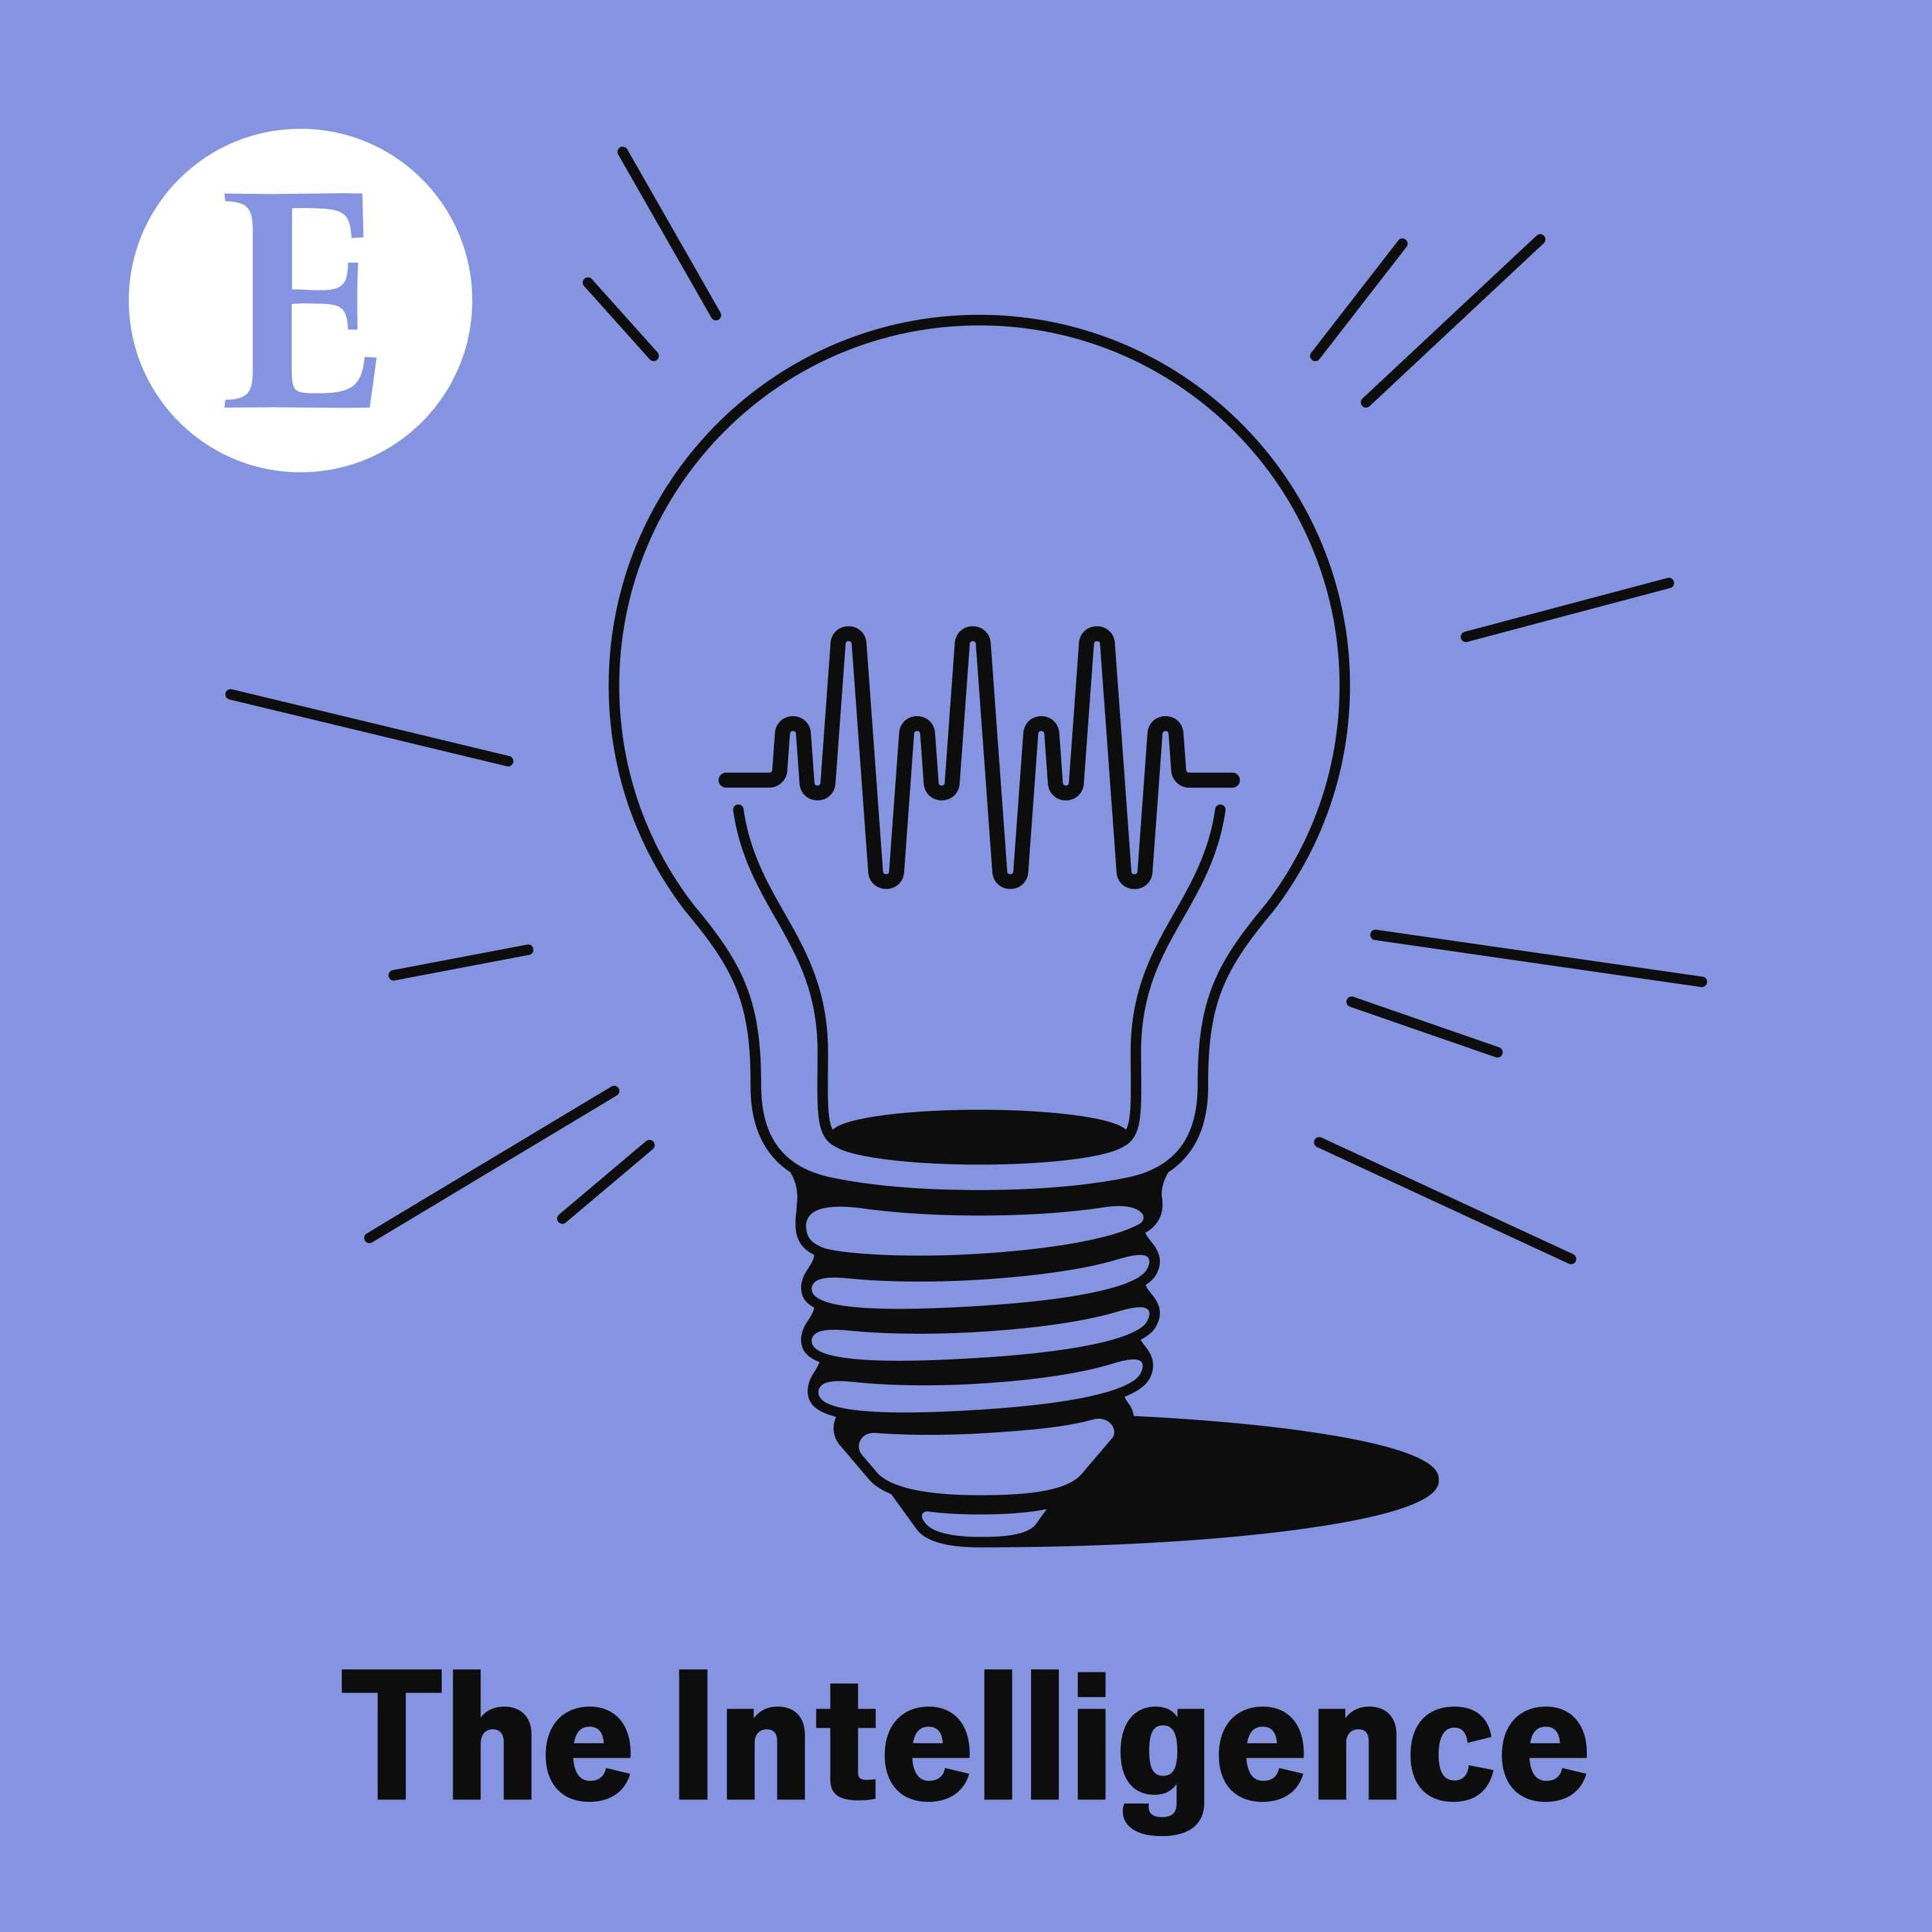 The Intelligence: The most personal choice